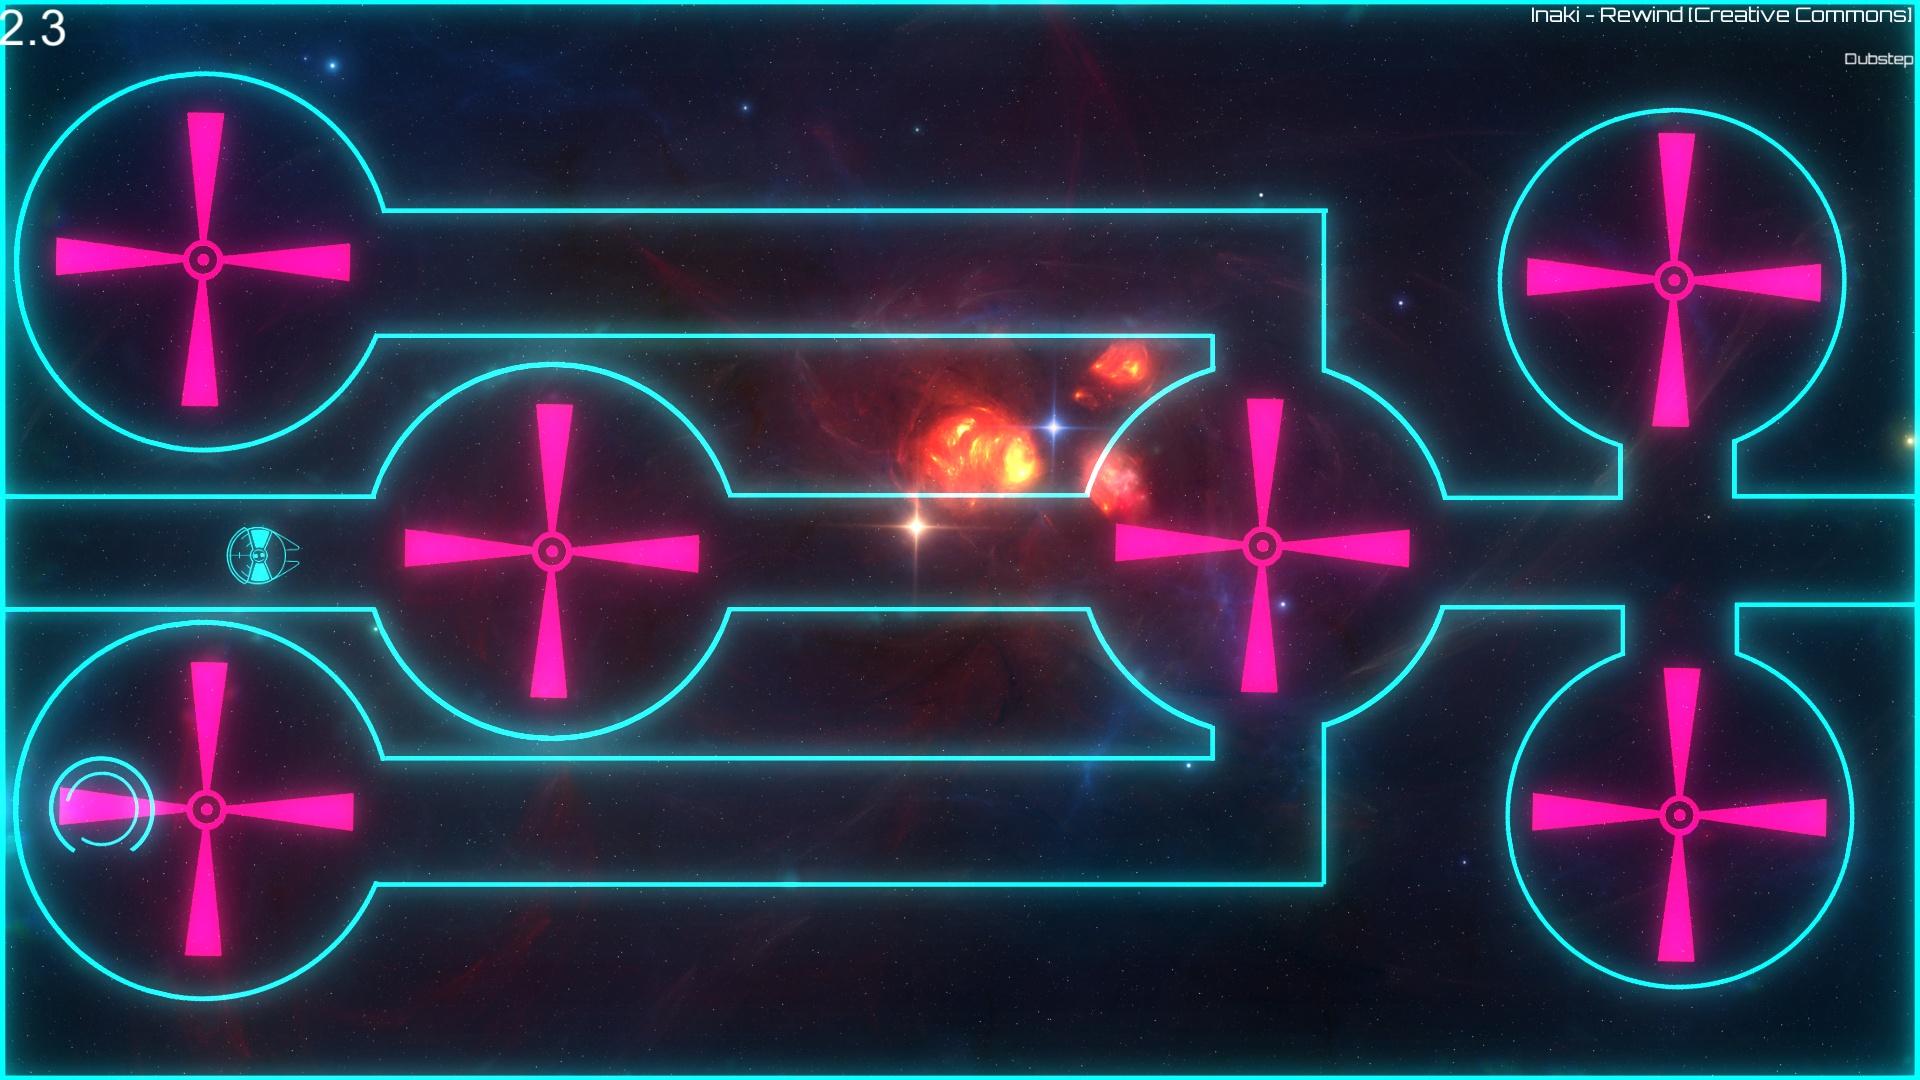 Screenshot №13 from game Neon Space 2